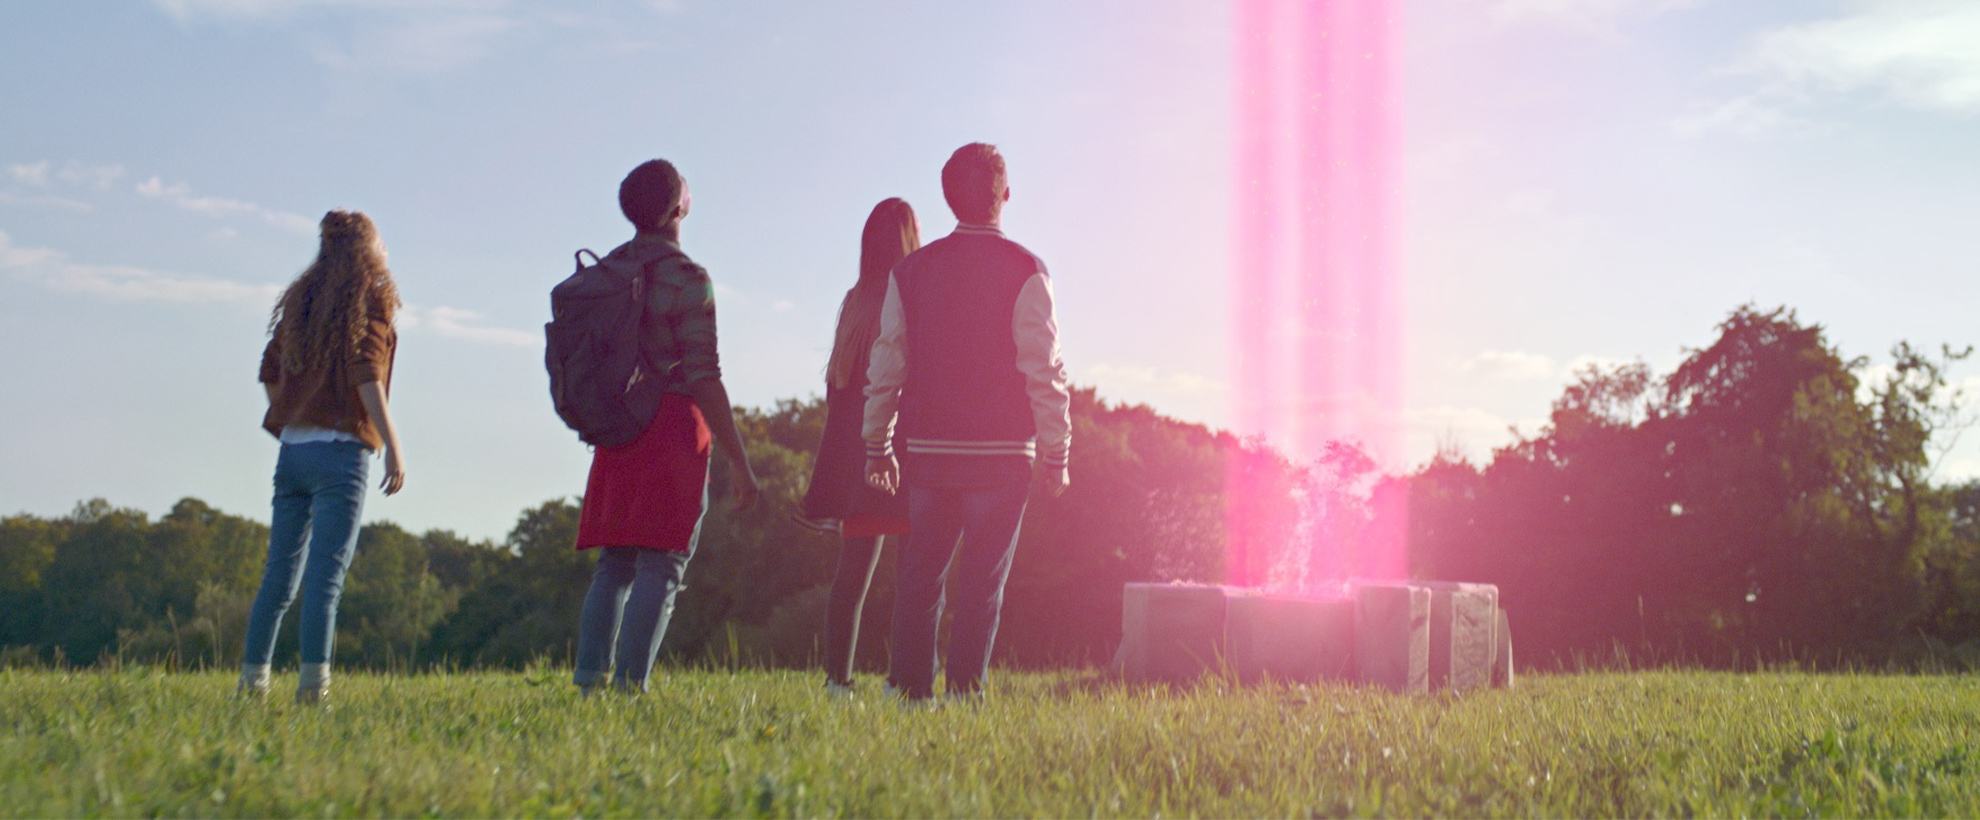 4 teens looking at a pink laser beam shooting into the sky